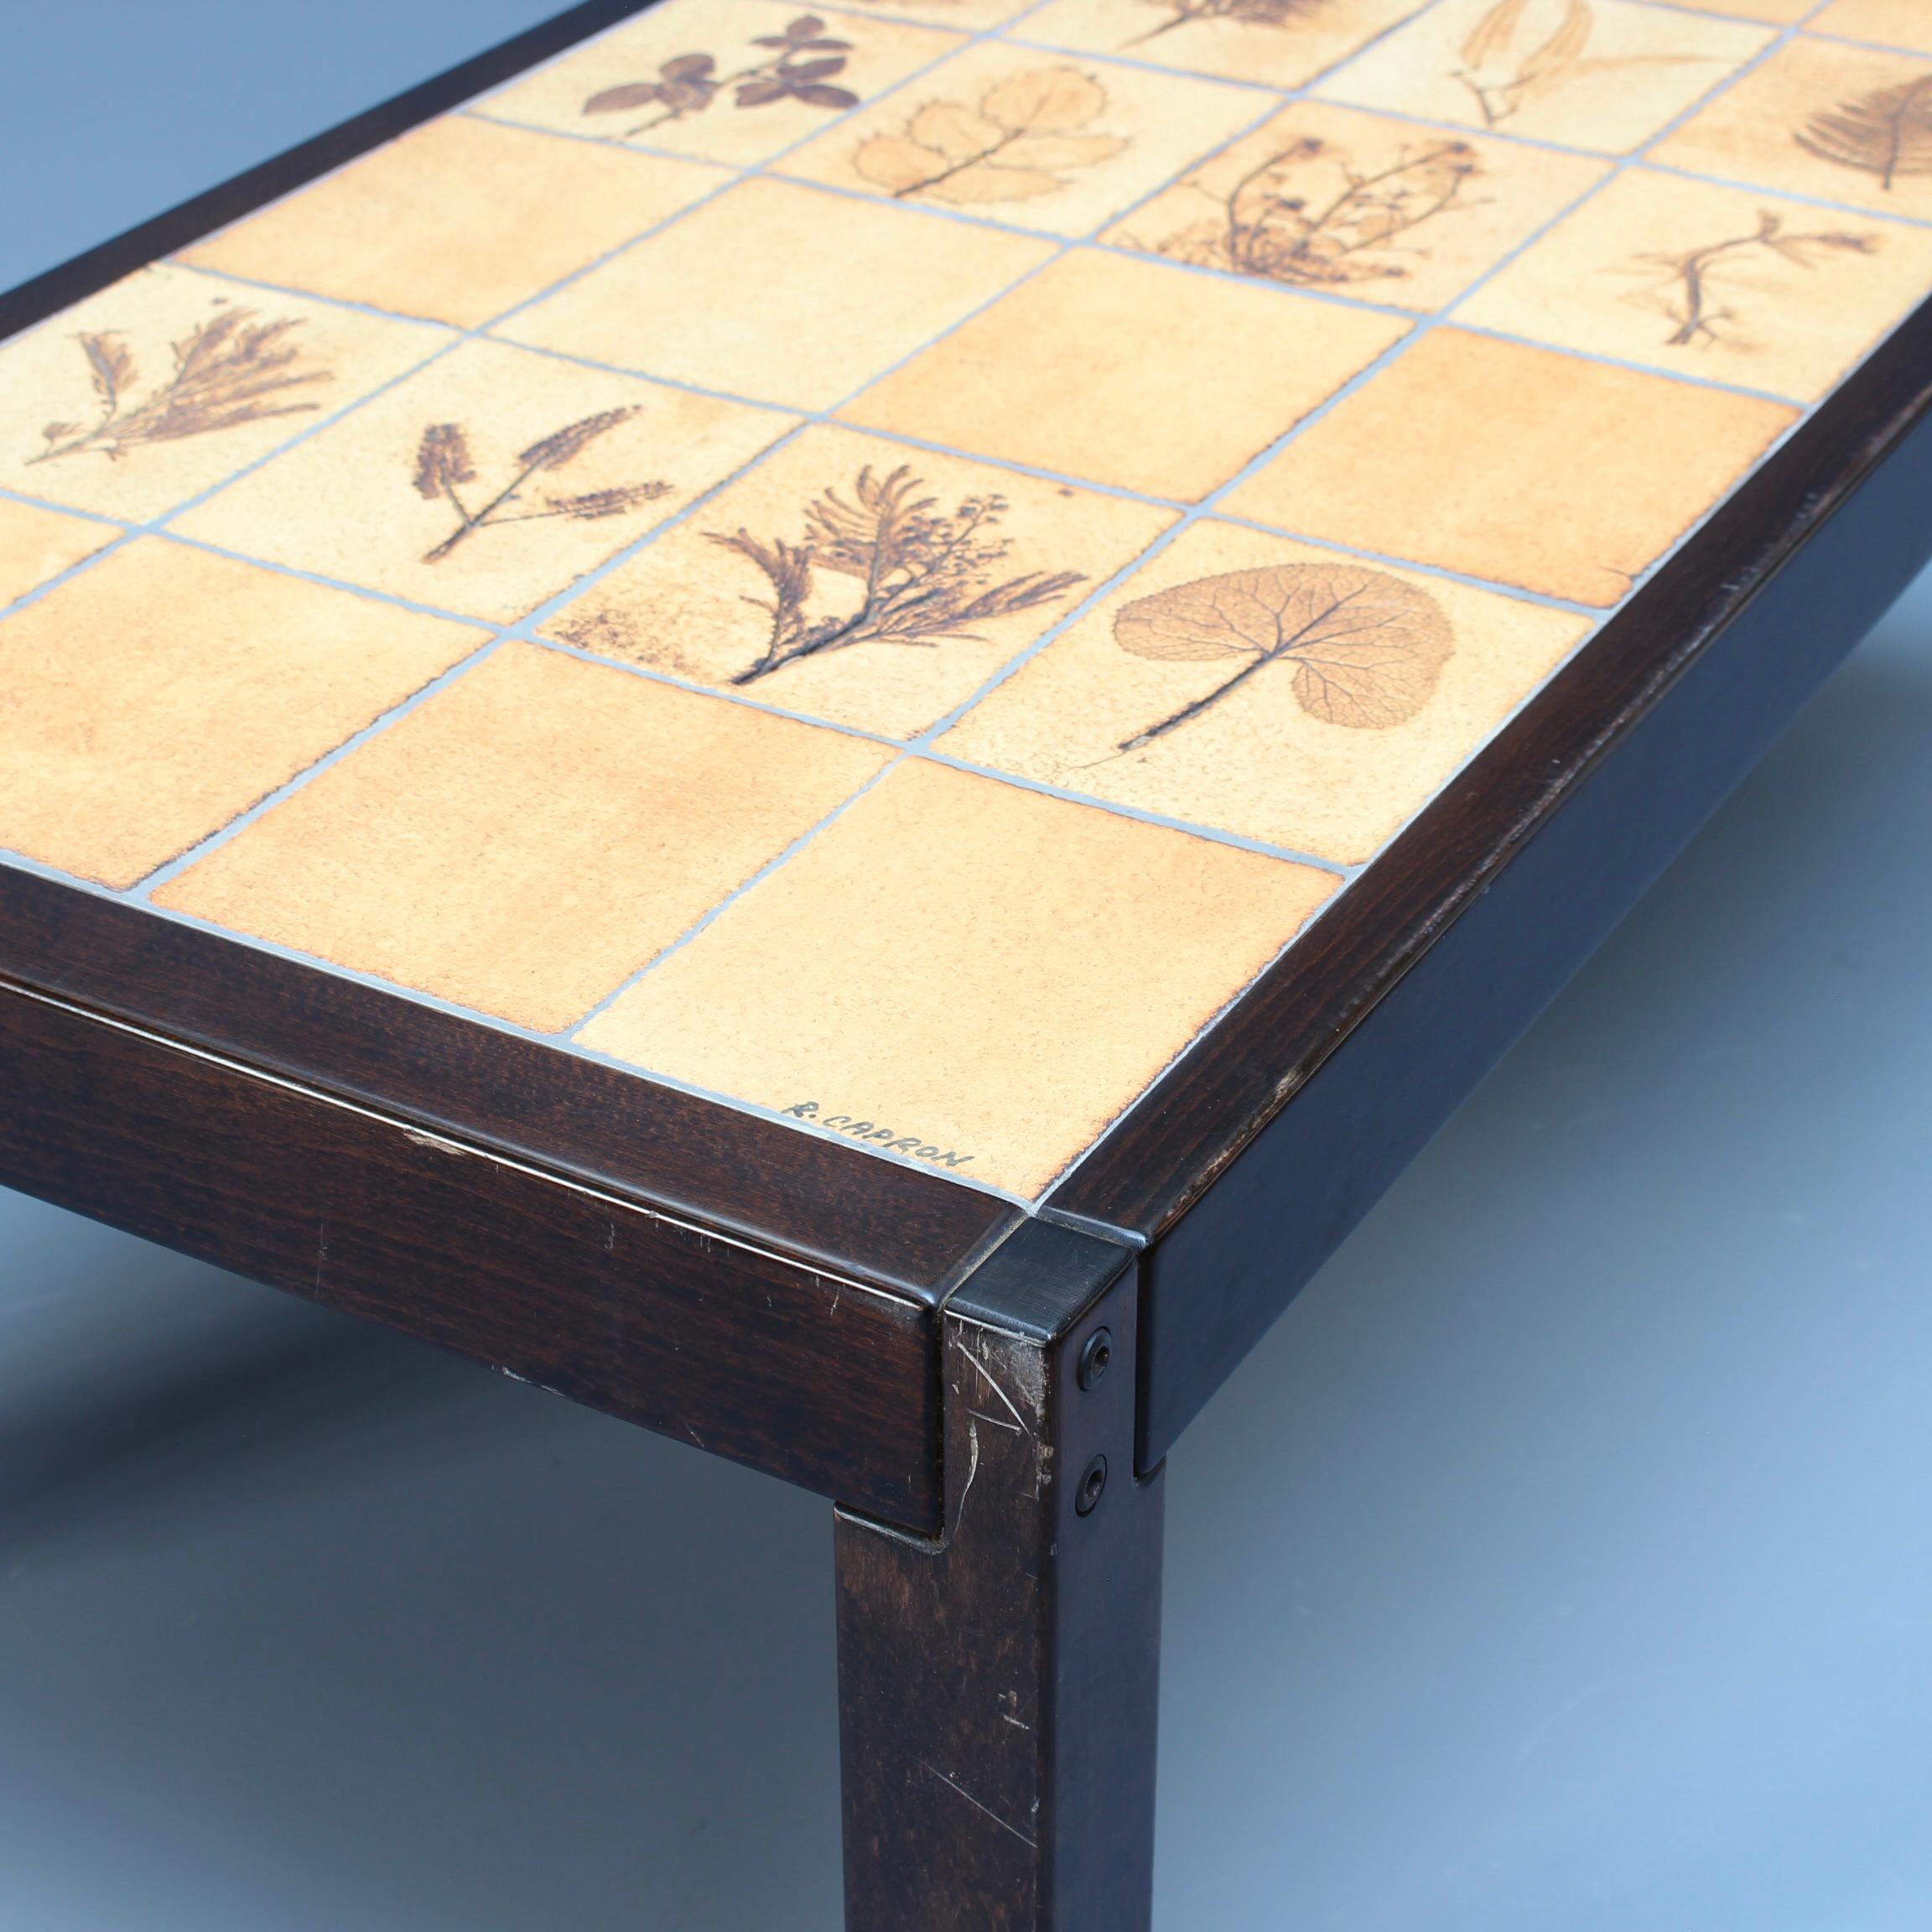 Vintage French Coffee Table with Leaf Motif Tiles by Roger Capron (circa 1970s) For Sale 4